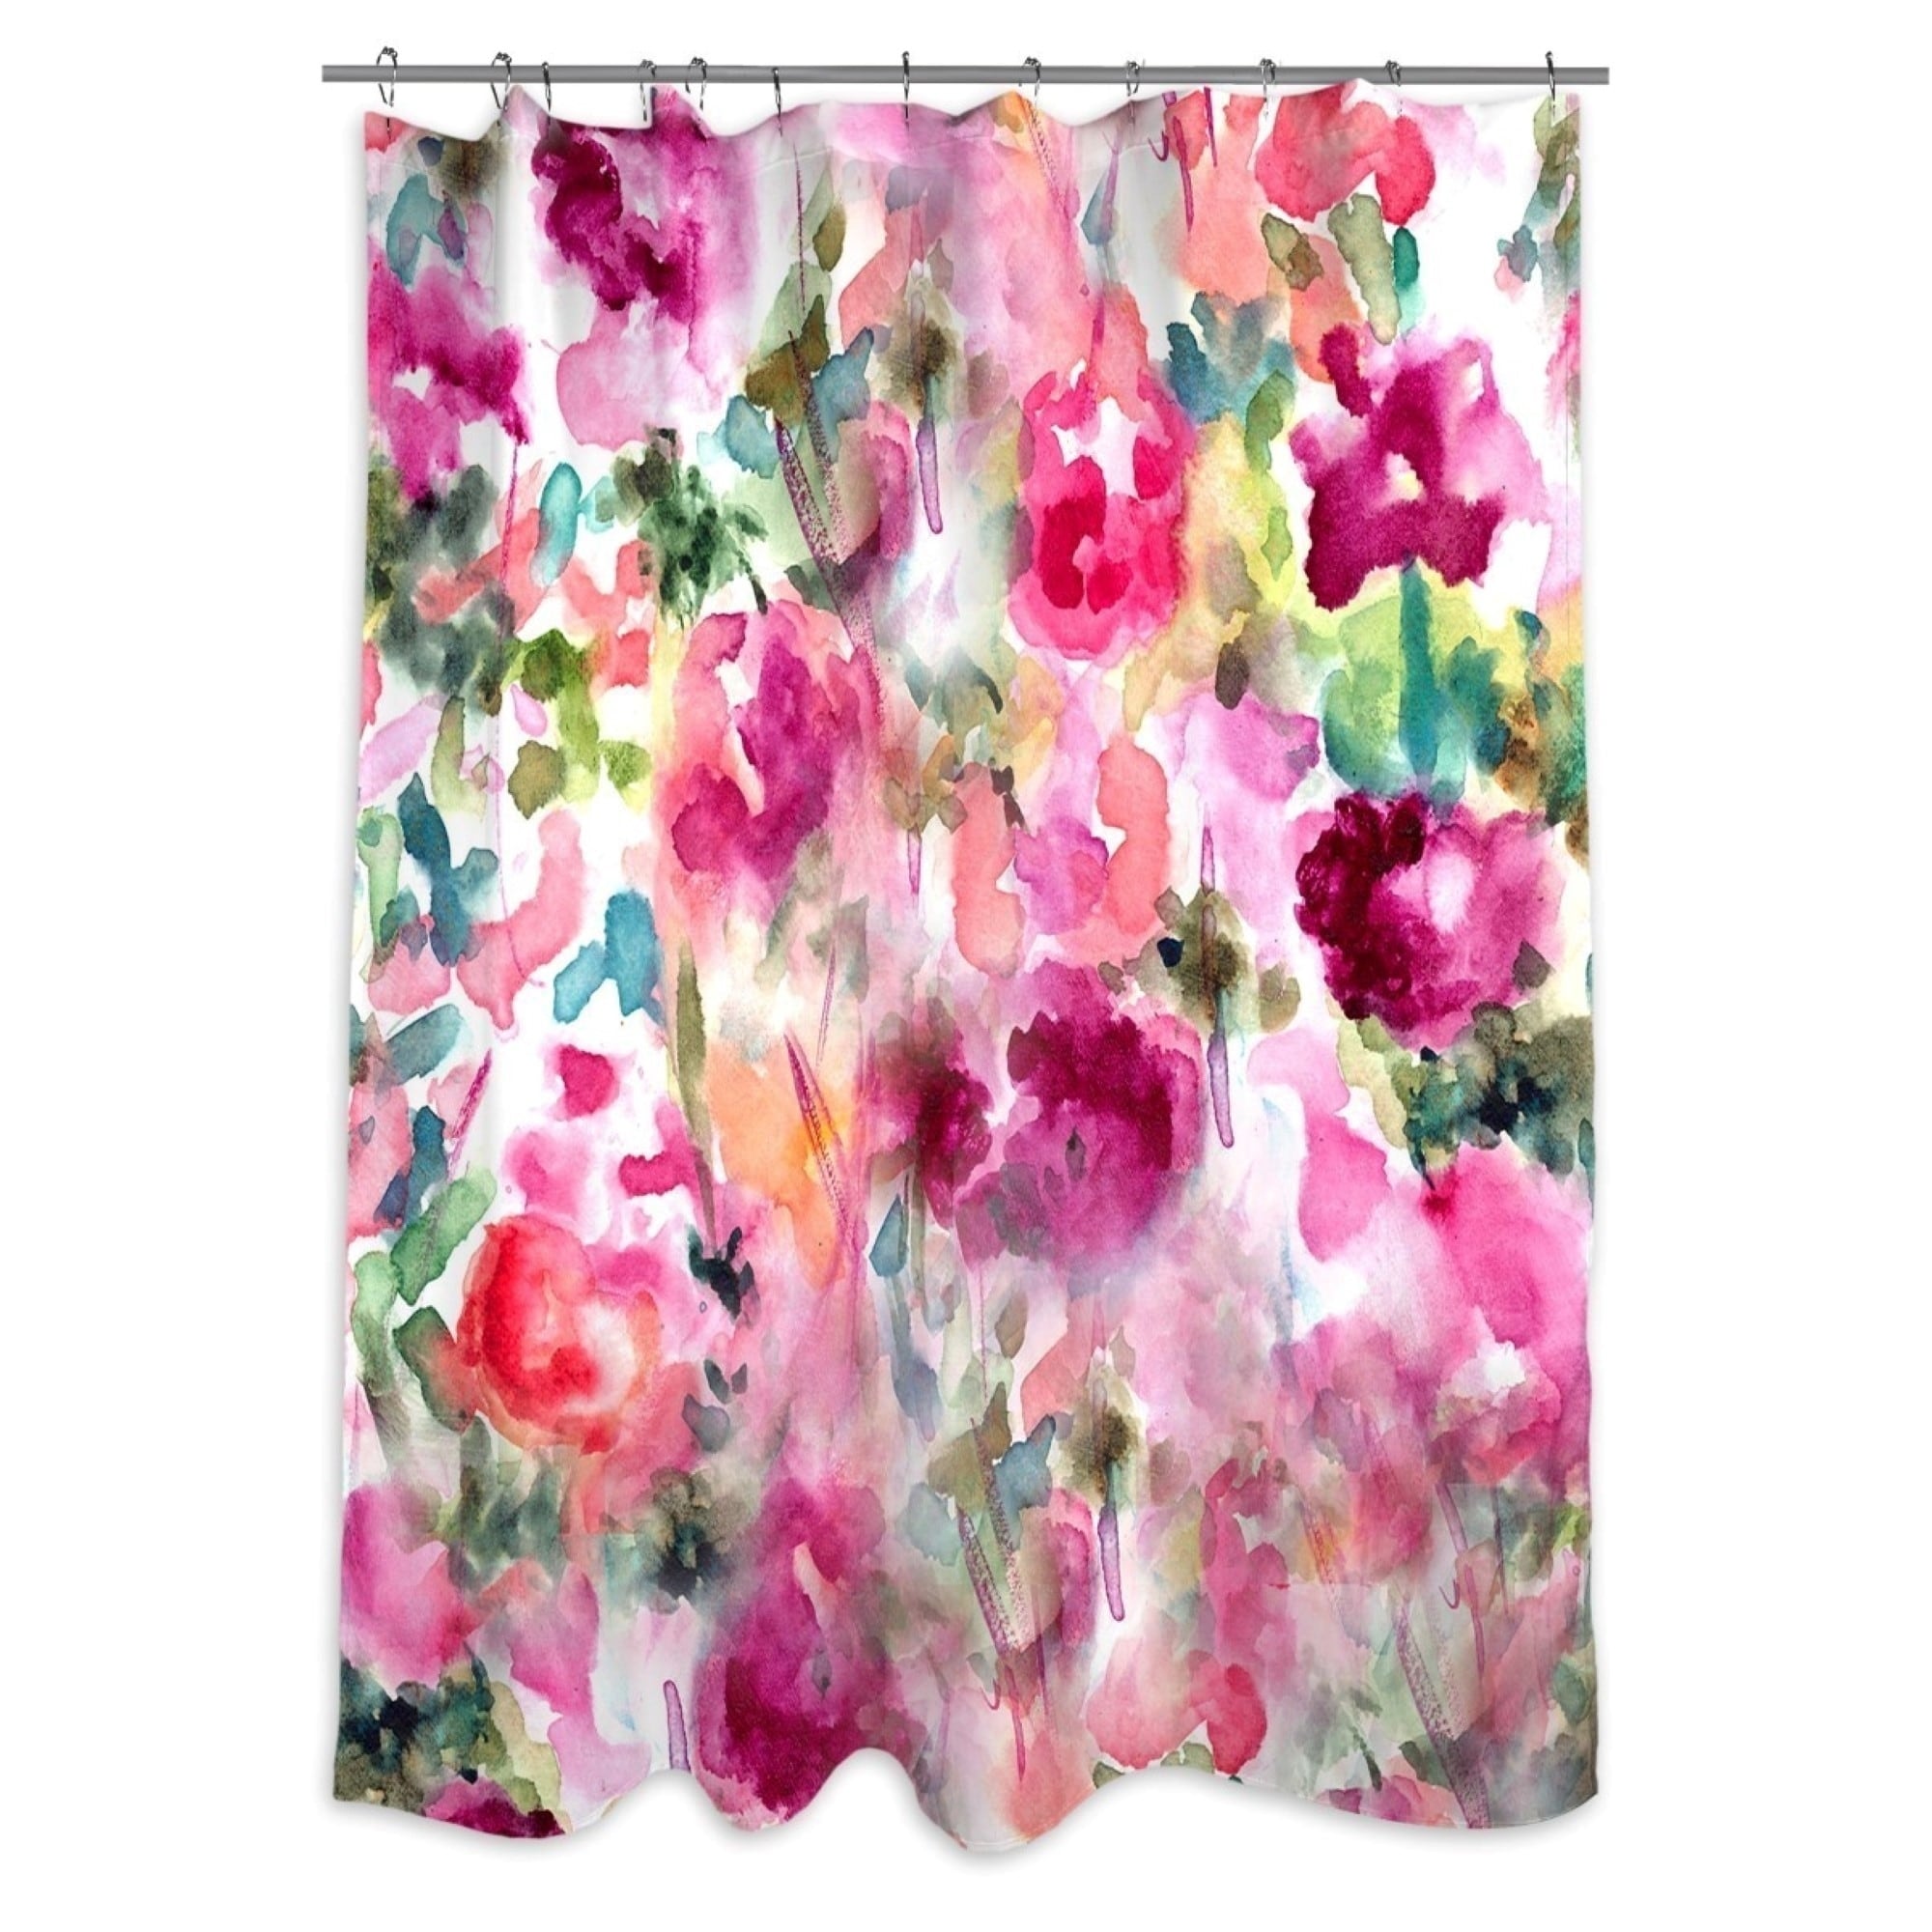 Oliver Gal 'In Wonderful' Floral and Botanical Decorative Shower Curtain - Pink, Green